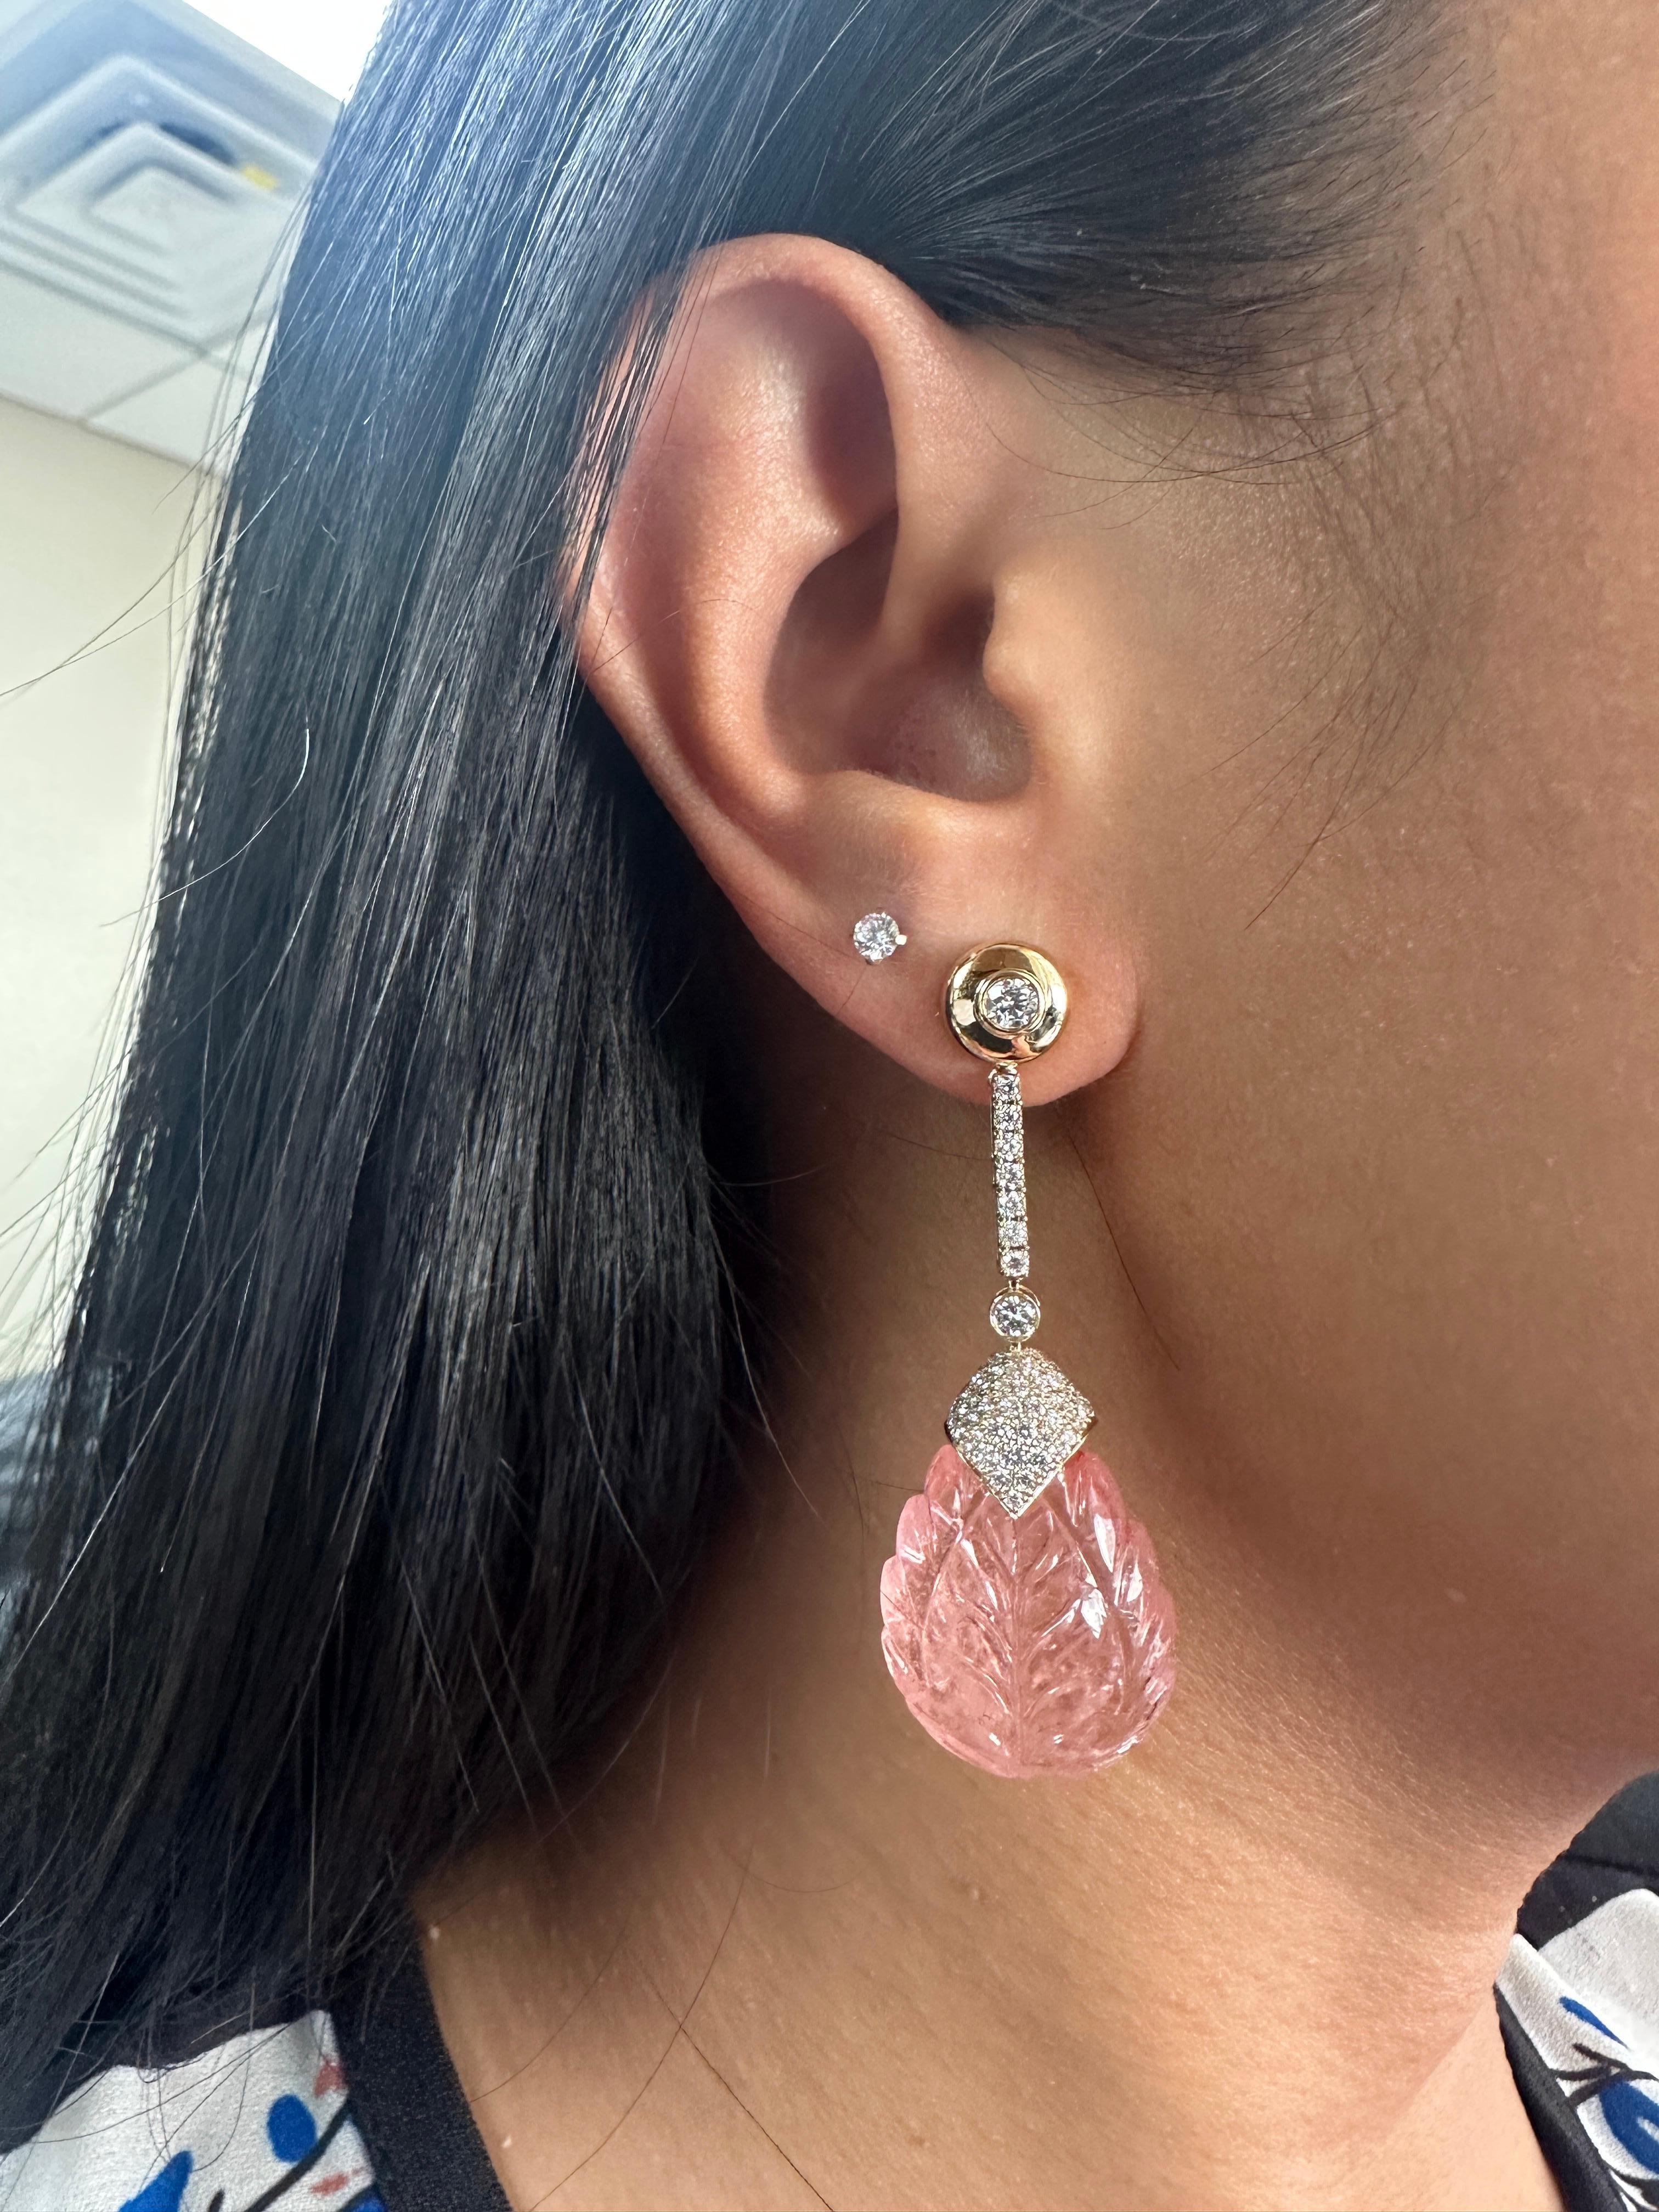 The Morganite Carved Drop Earrings with Diamond Cap in 18K Yellow Gold are exquisite pieces of jewelry from the 'G-One' Collection. These earrings feature stunning morganite gemstones that have been expertly carved into elegant drop shapes. The